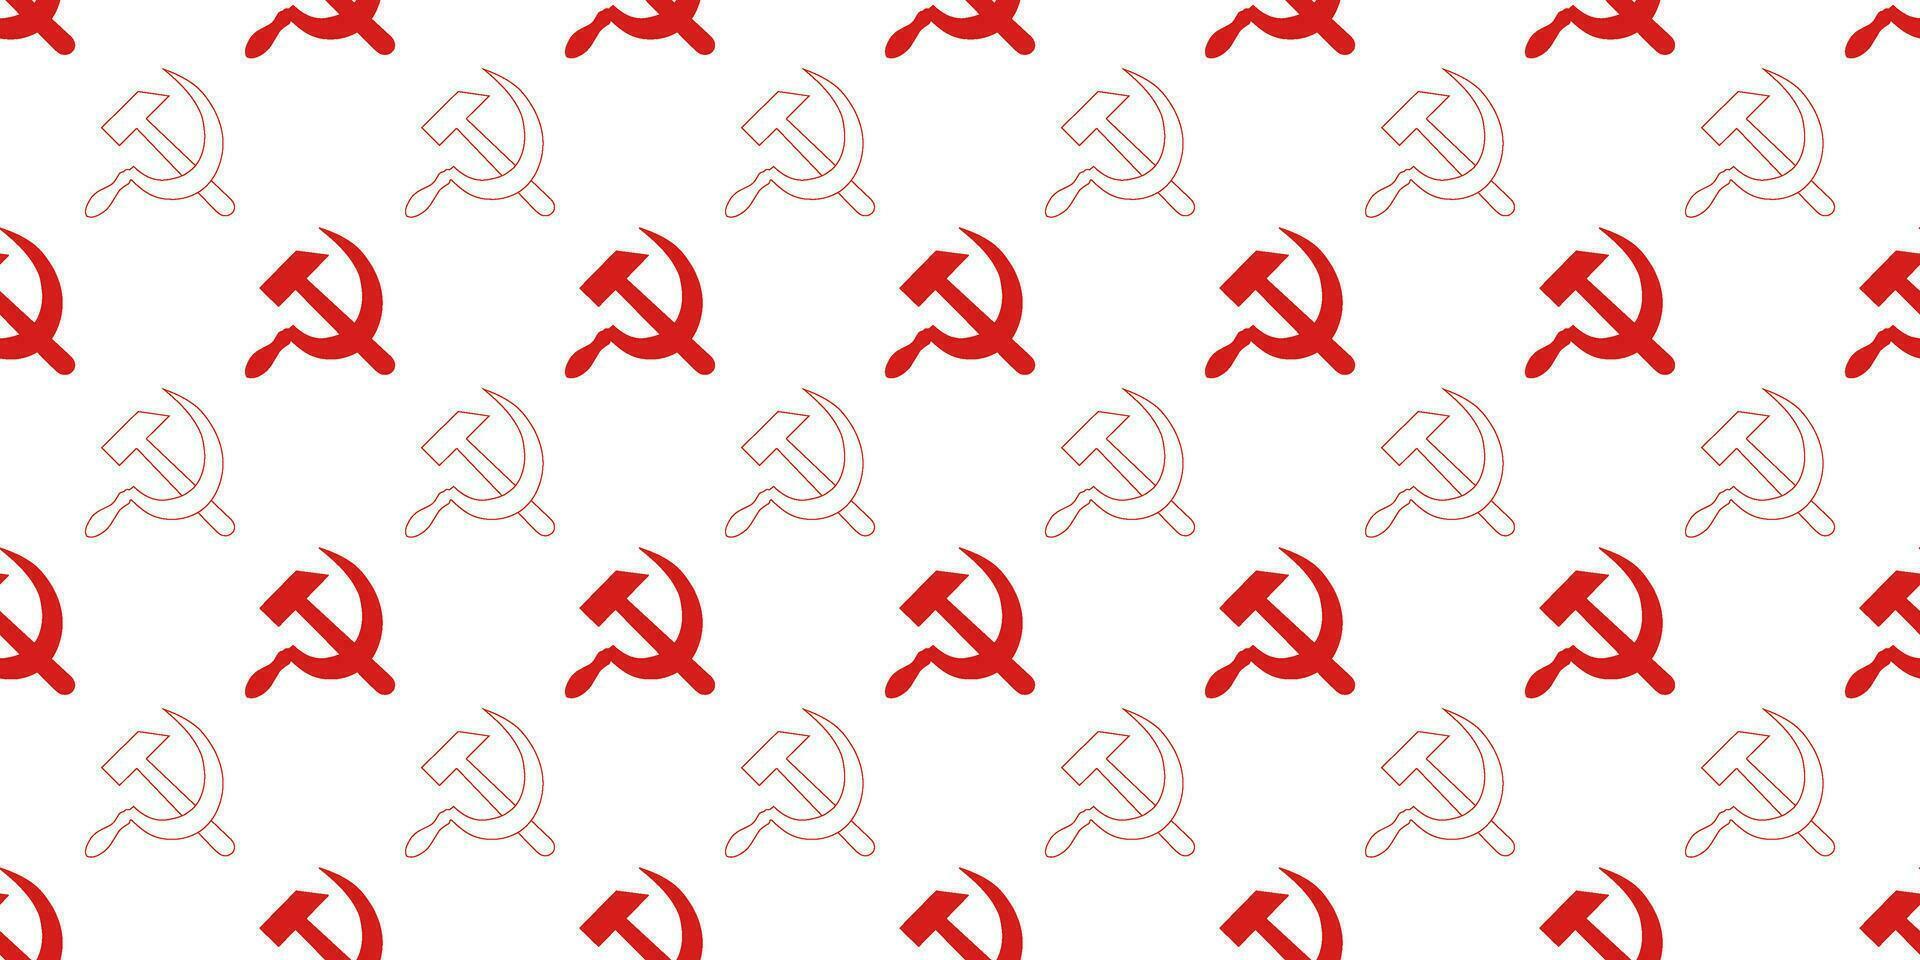 hammer and sickle socialism symbol seamless pattern vector